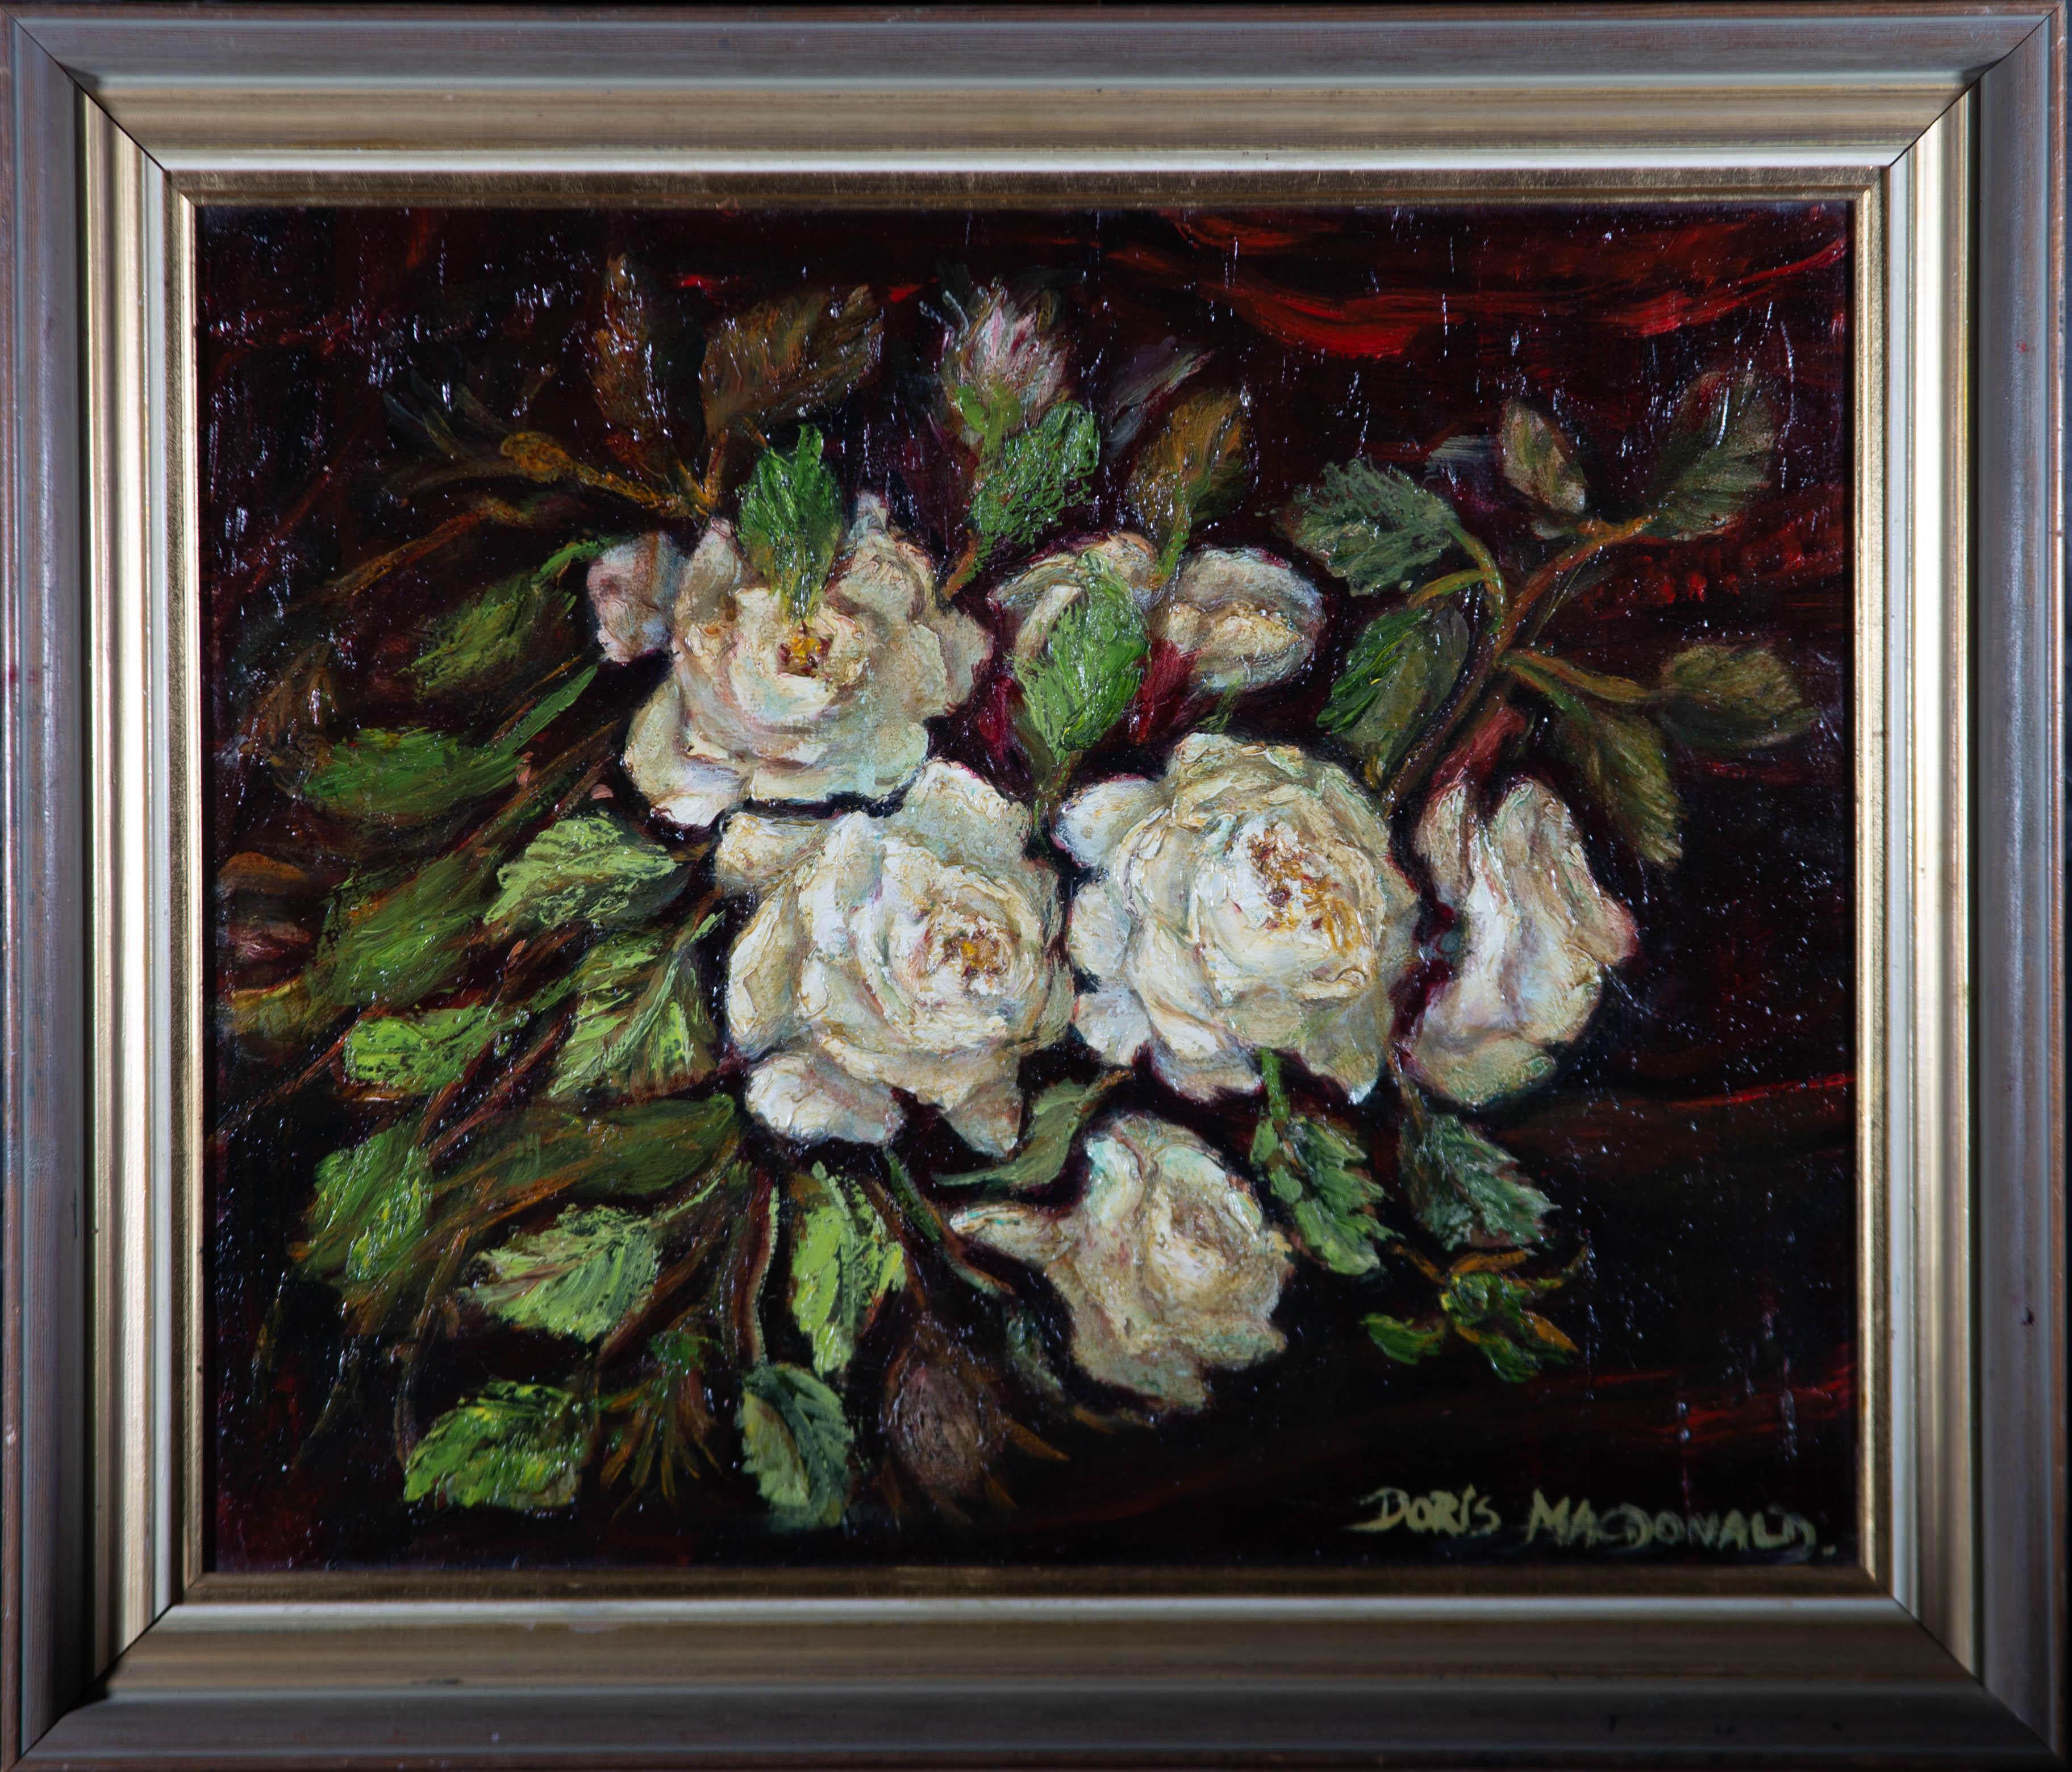 A charming impasto oil painting by Doris MacDonald, depicting a still life scene with white roses. Signed to the lower right-hand corner. There is a label on the reverse inscribed with the artist's name and title. Well-presented in a wooden frame